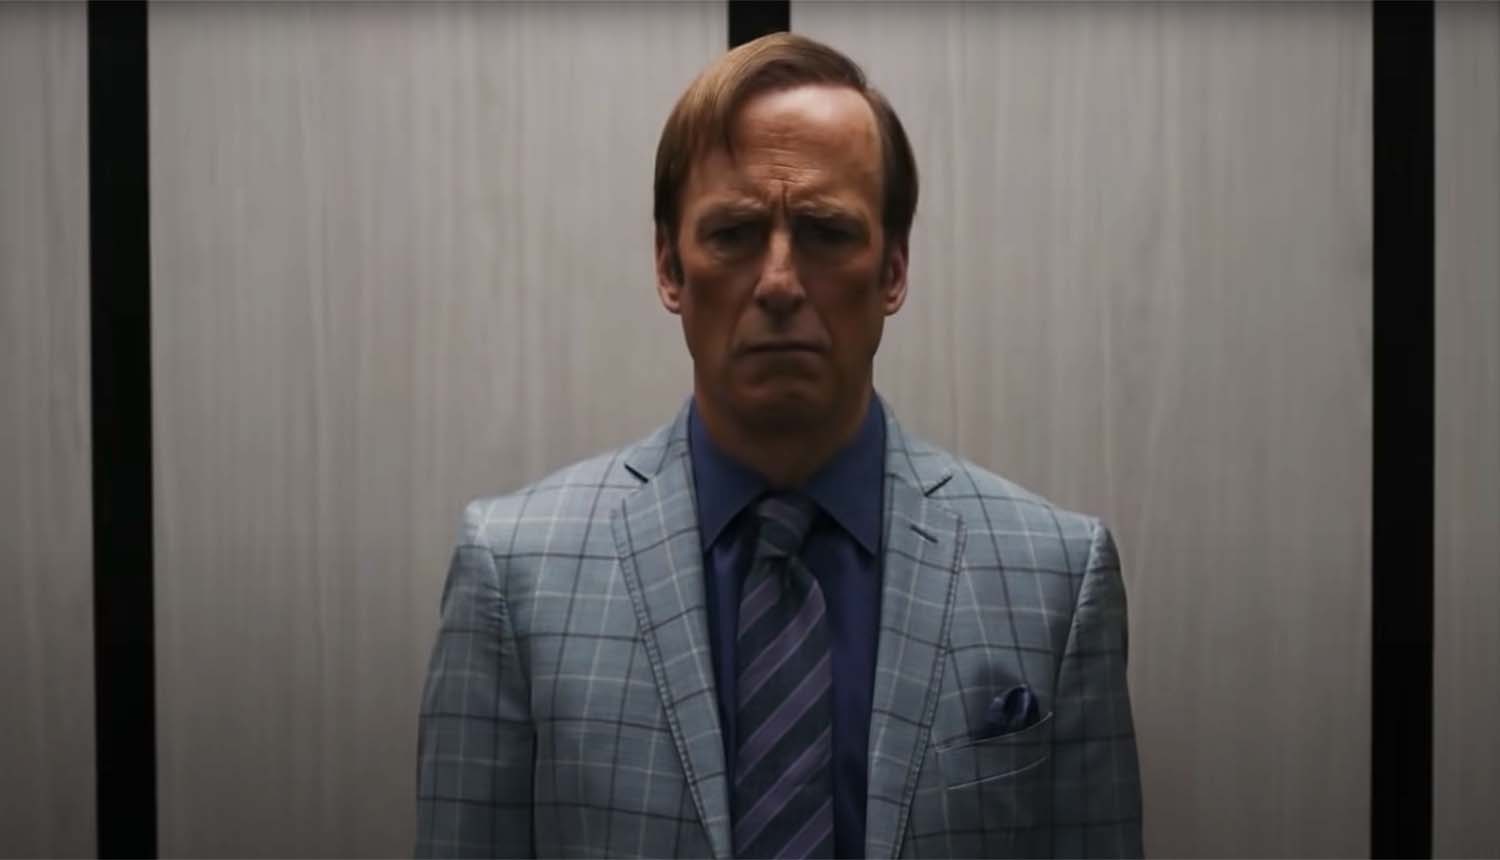 Better Call Saul's compelling first season ends